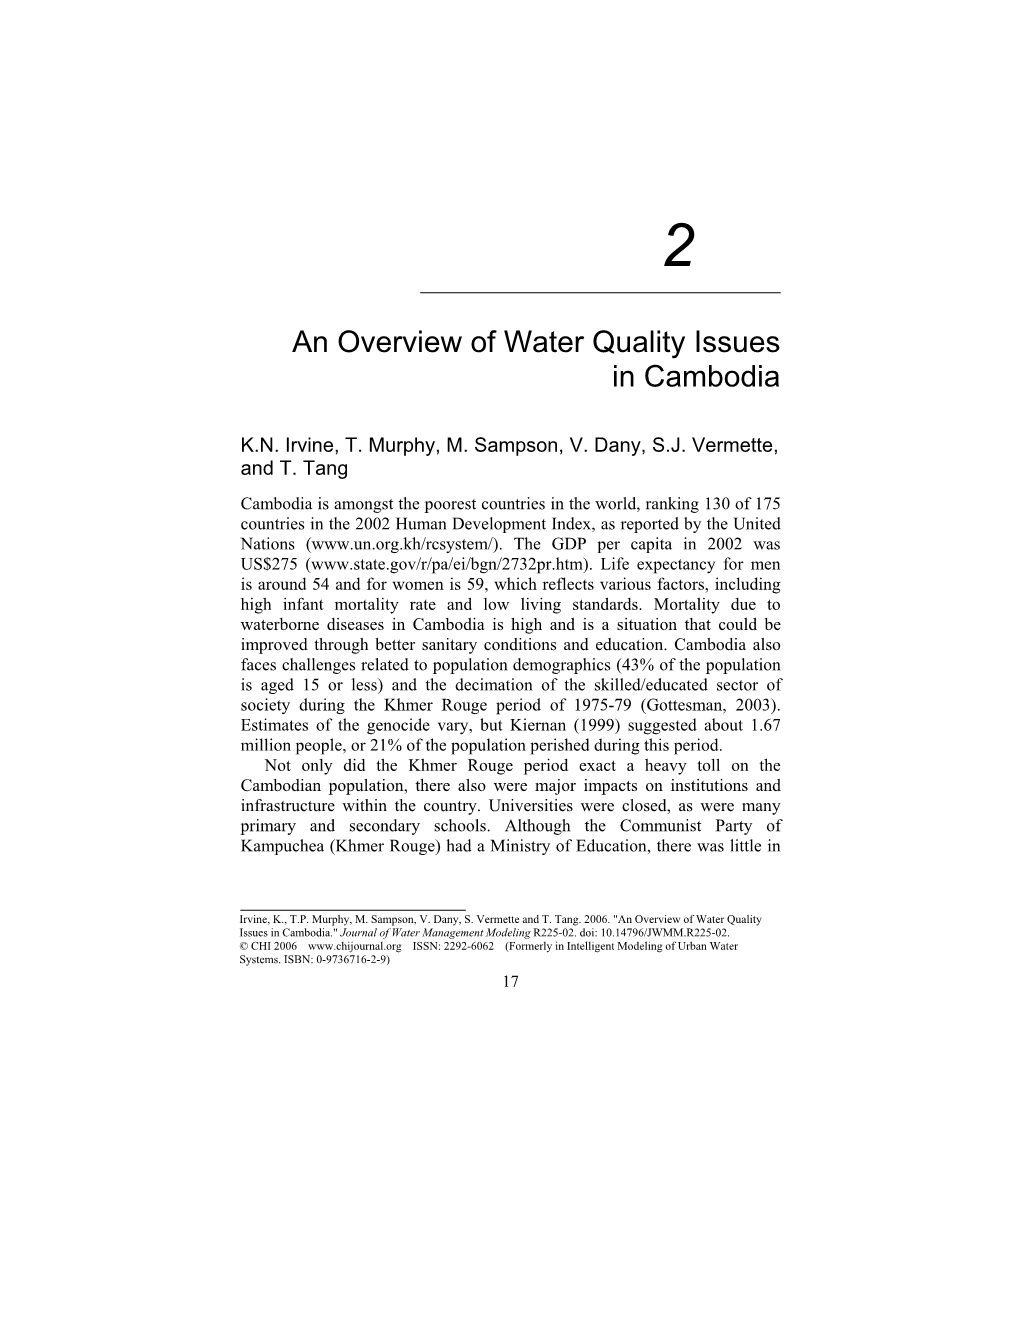 An Overview of Water Quality Issues in Cambodia